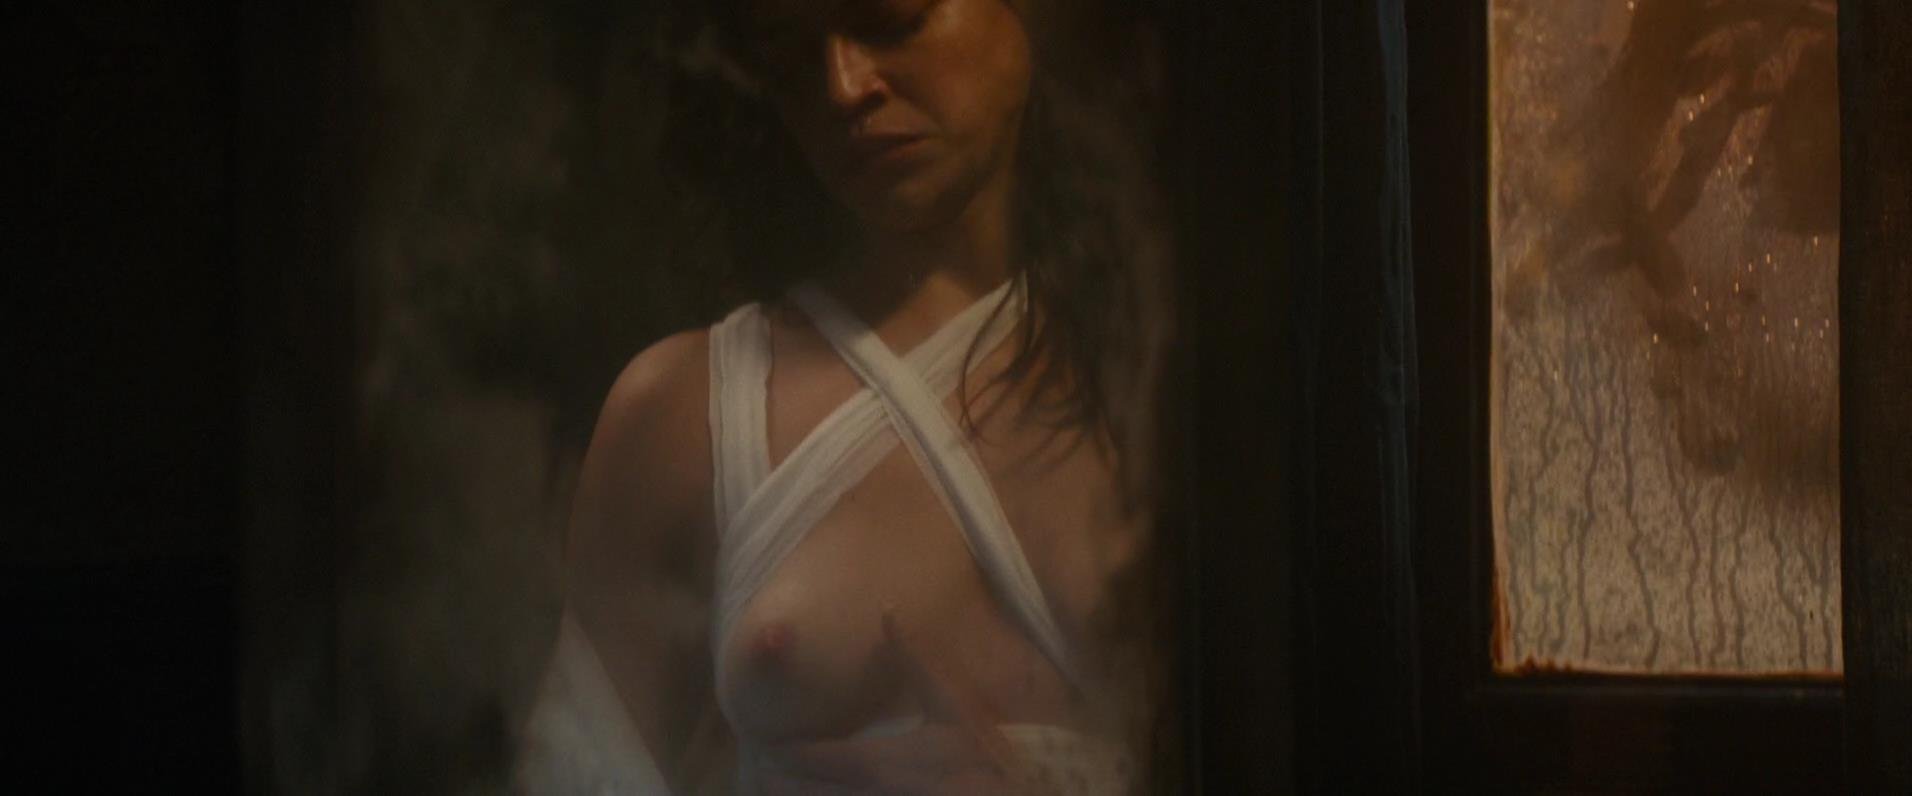 Michelle Rodriguez, Caitlin Gerard Nude - The Assignment (39 Pics + GIFs & Video)